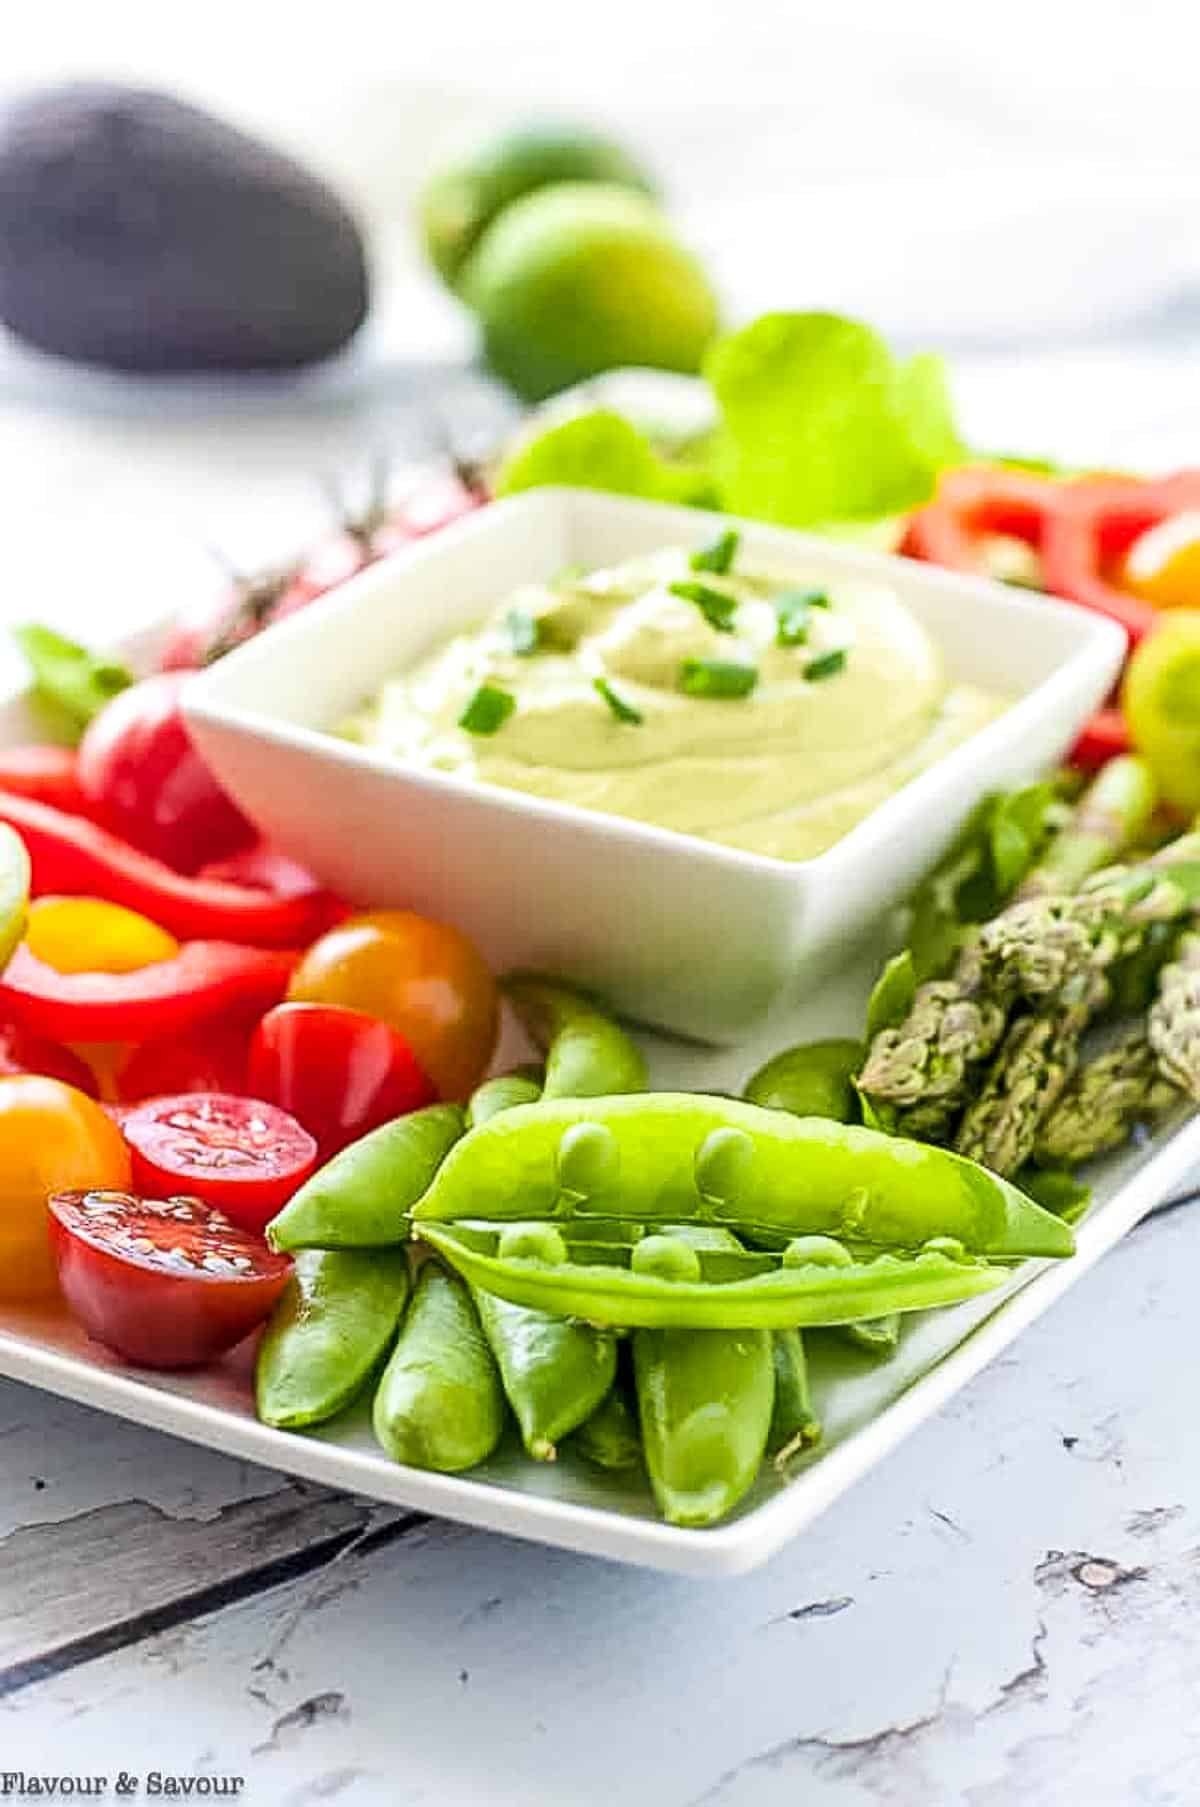 https://www.flavourandsavour.com/wp-content/uploads/2022/08/mayo-free-greed-goddess-dressing-and-dip-1.jpg